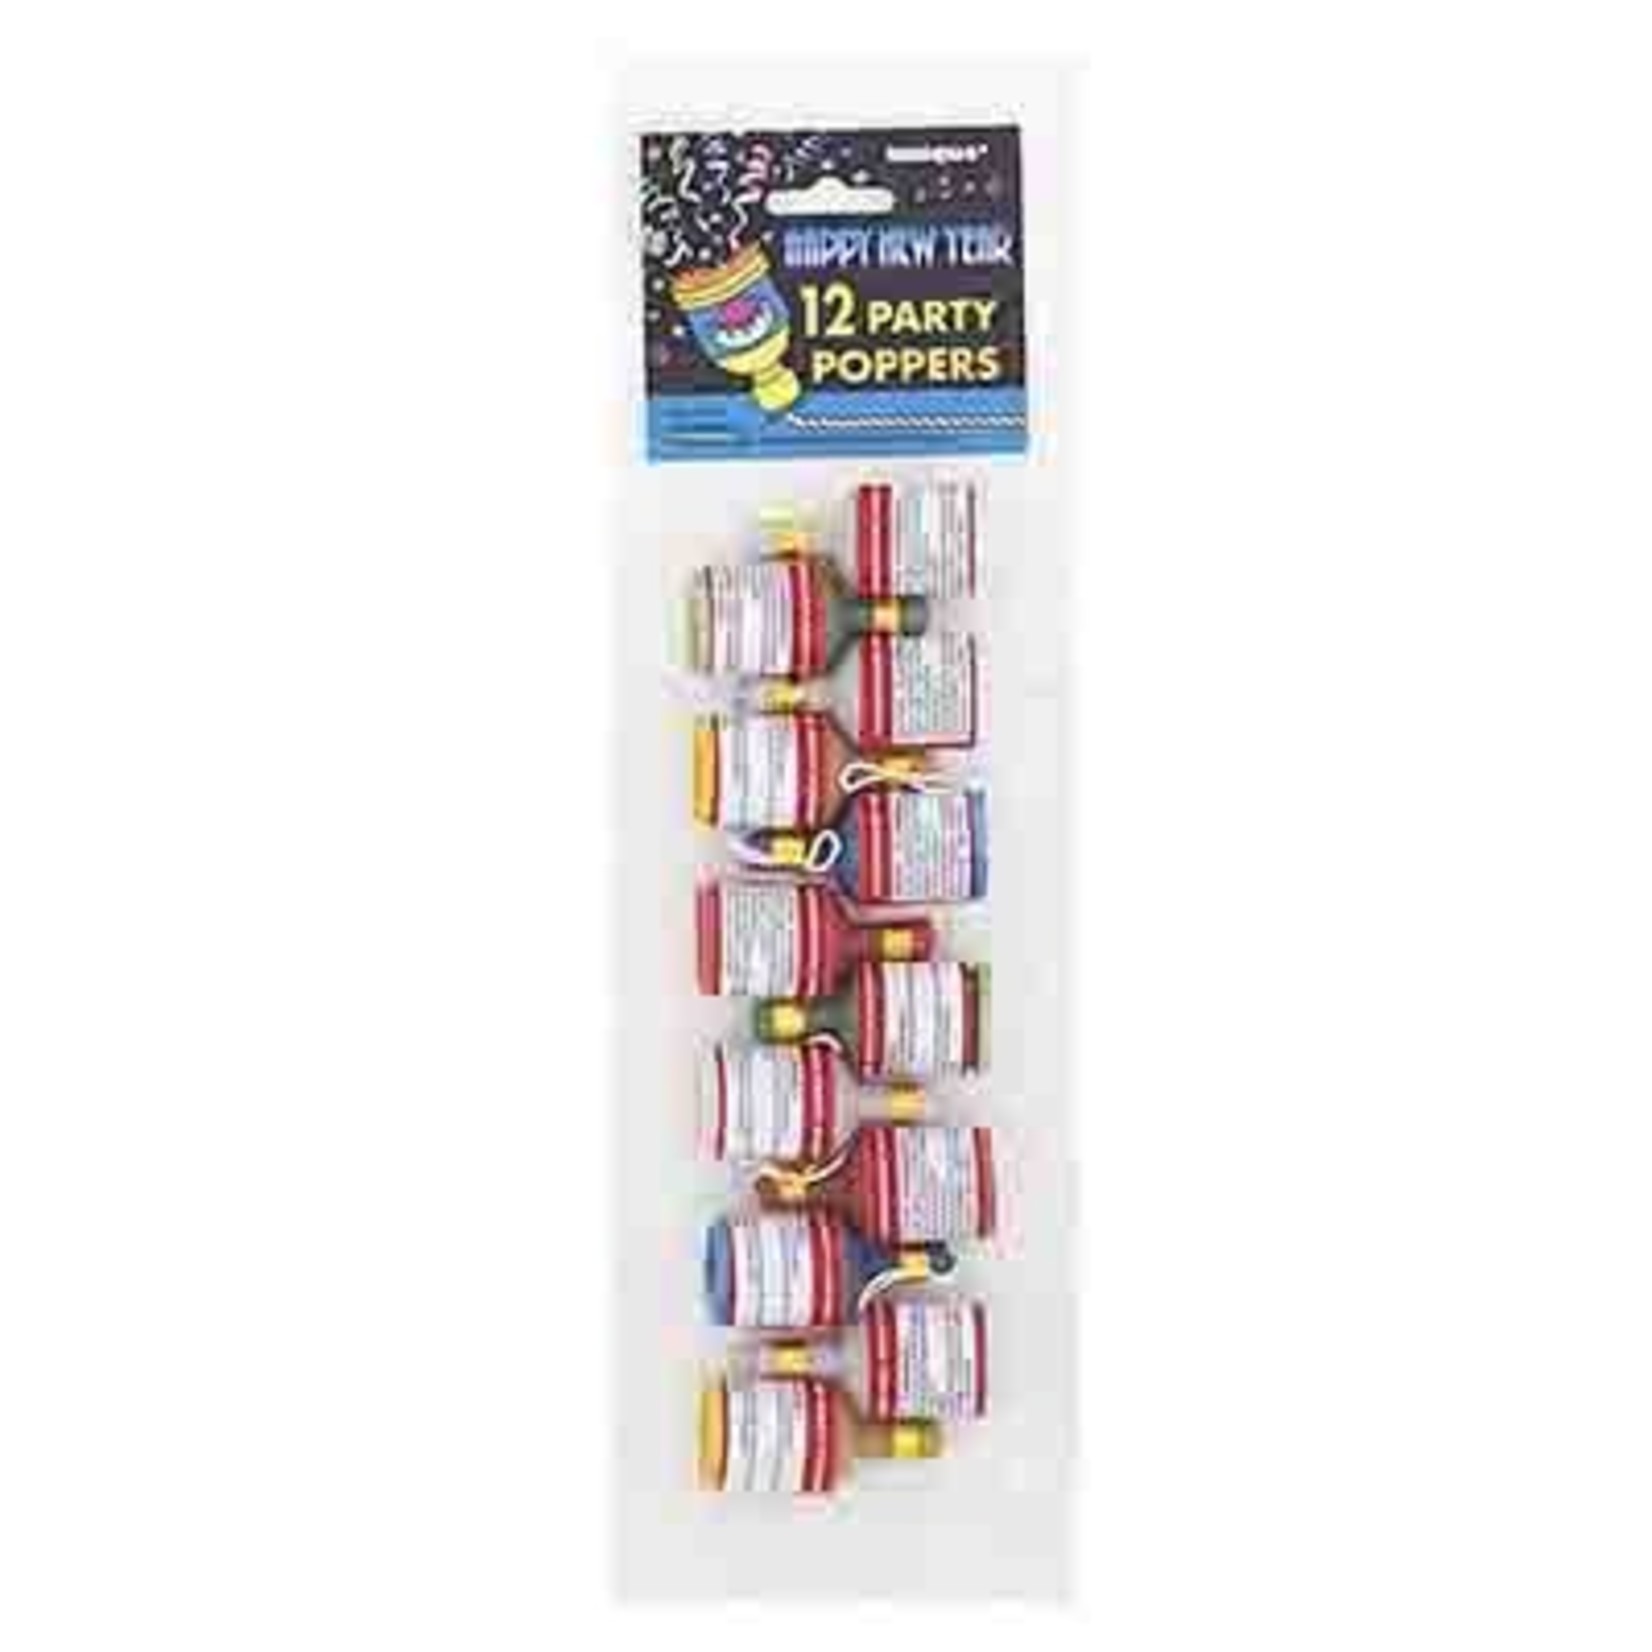 Hubbard Wholesale Champagne Party Poppers - 12ct.